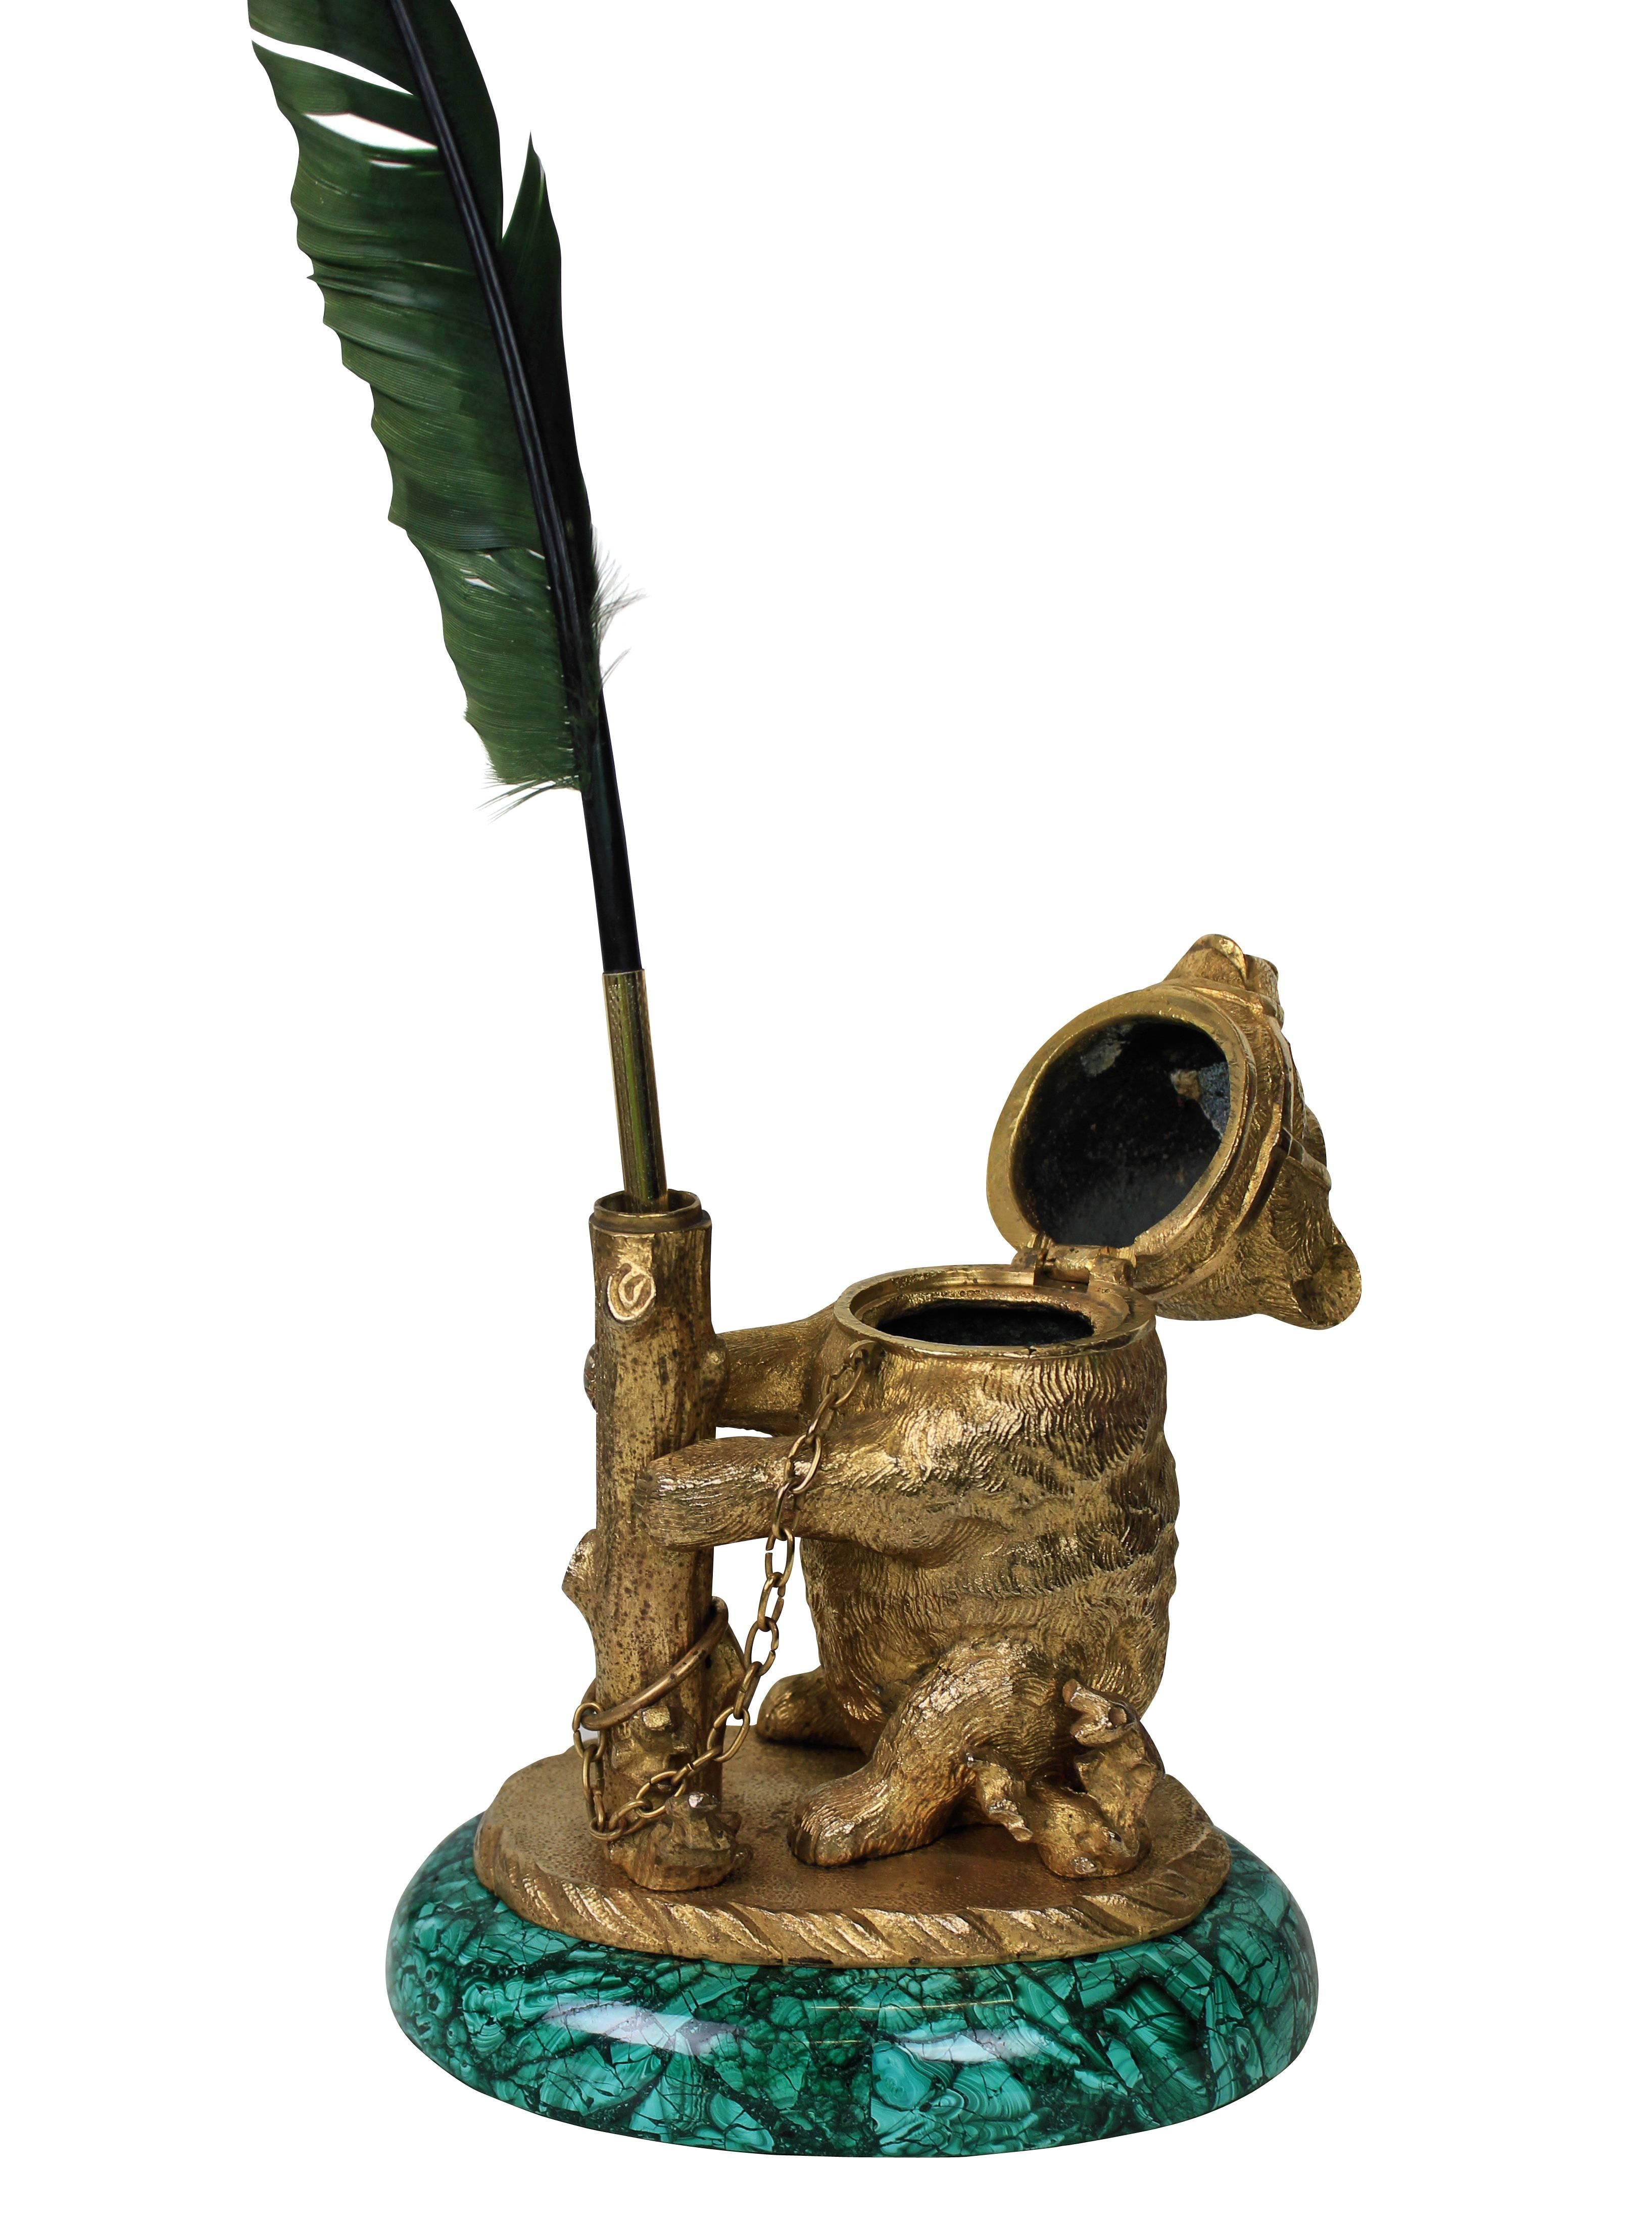 A fine Russian encrier (ink pot) in the form of a bear in ormolu with ruby eyes and on a malachite base.